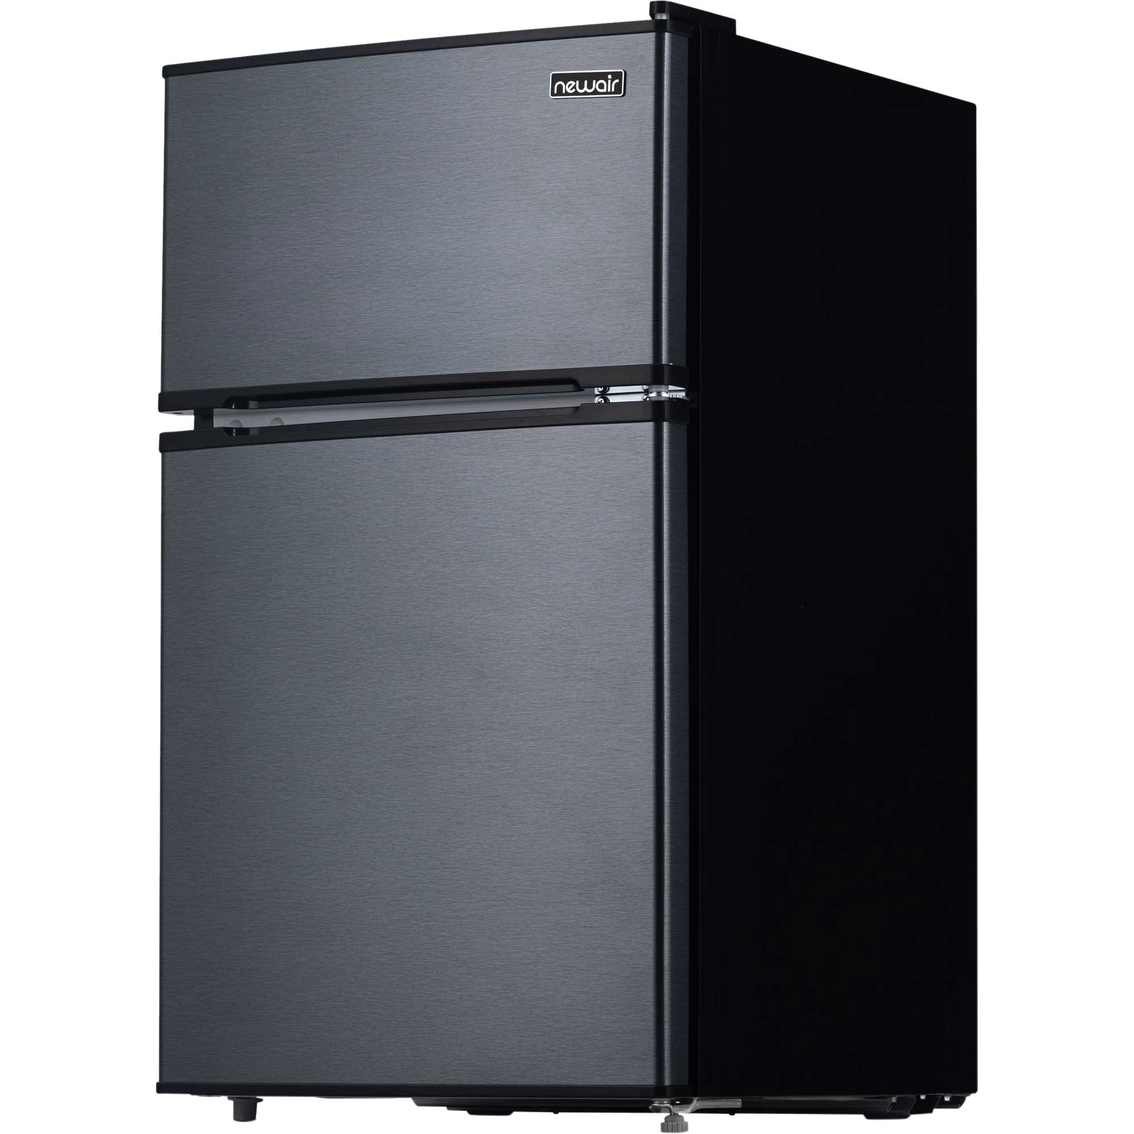 New Air LLC 3.1 cu. ft. Compact Refrigerator - Image 2 of 10